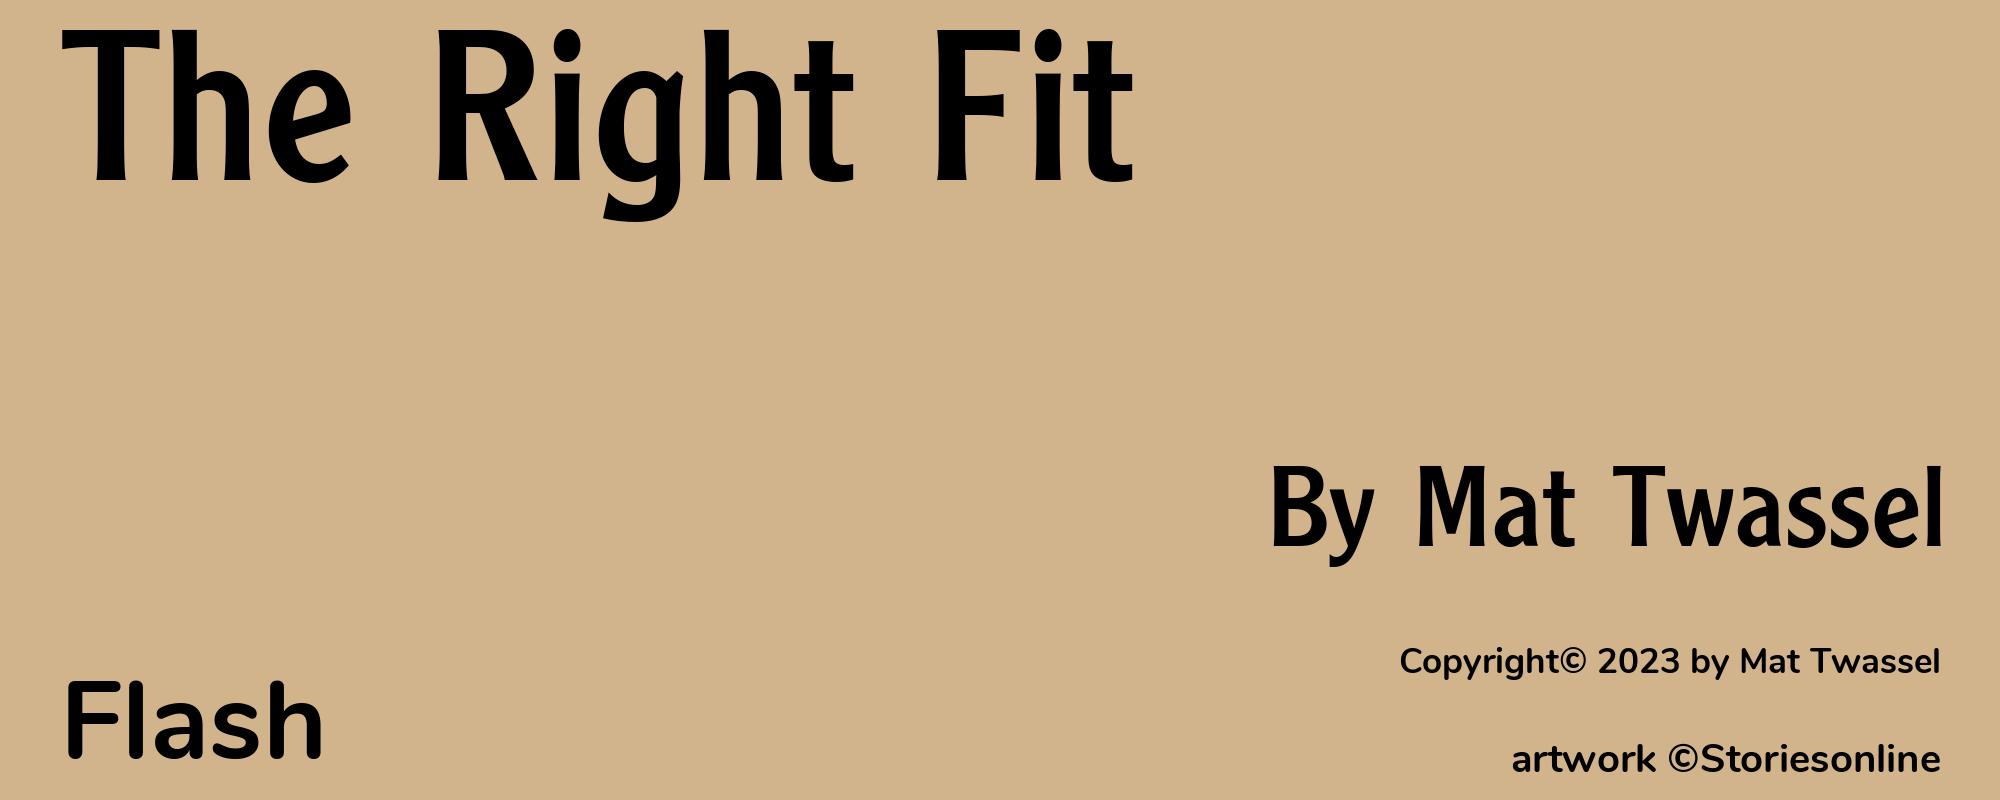 The Right Fit - Cover